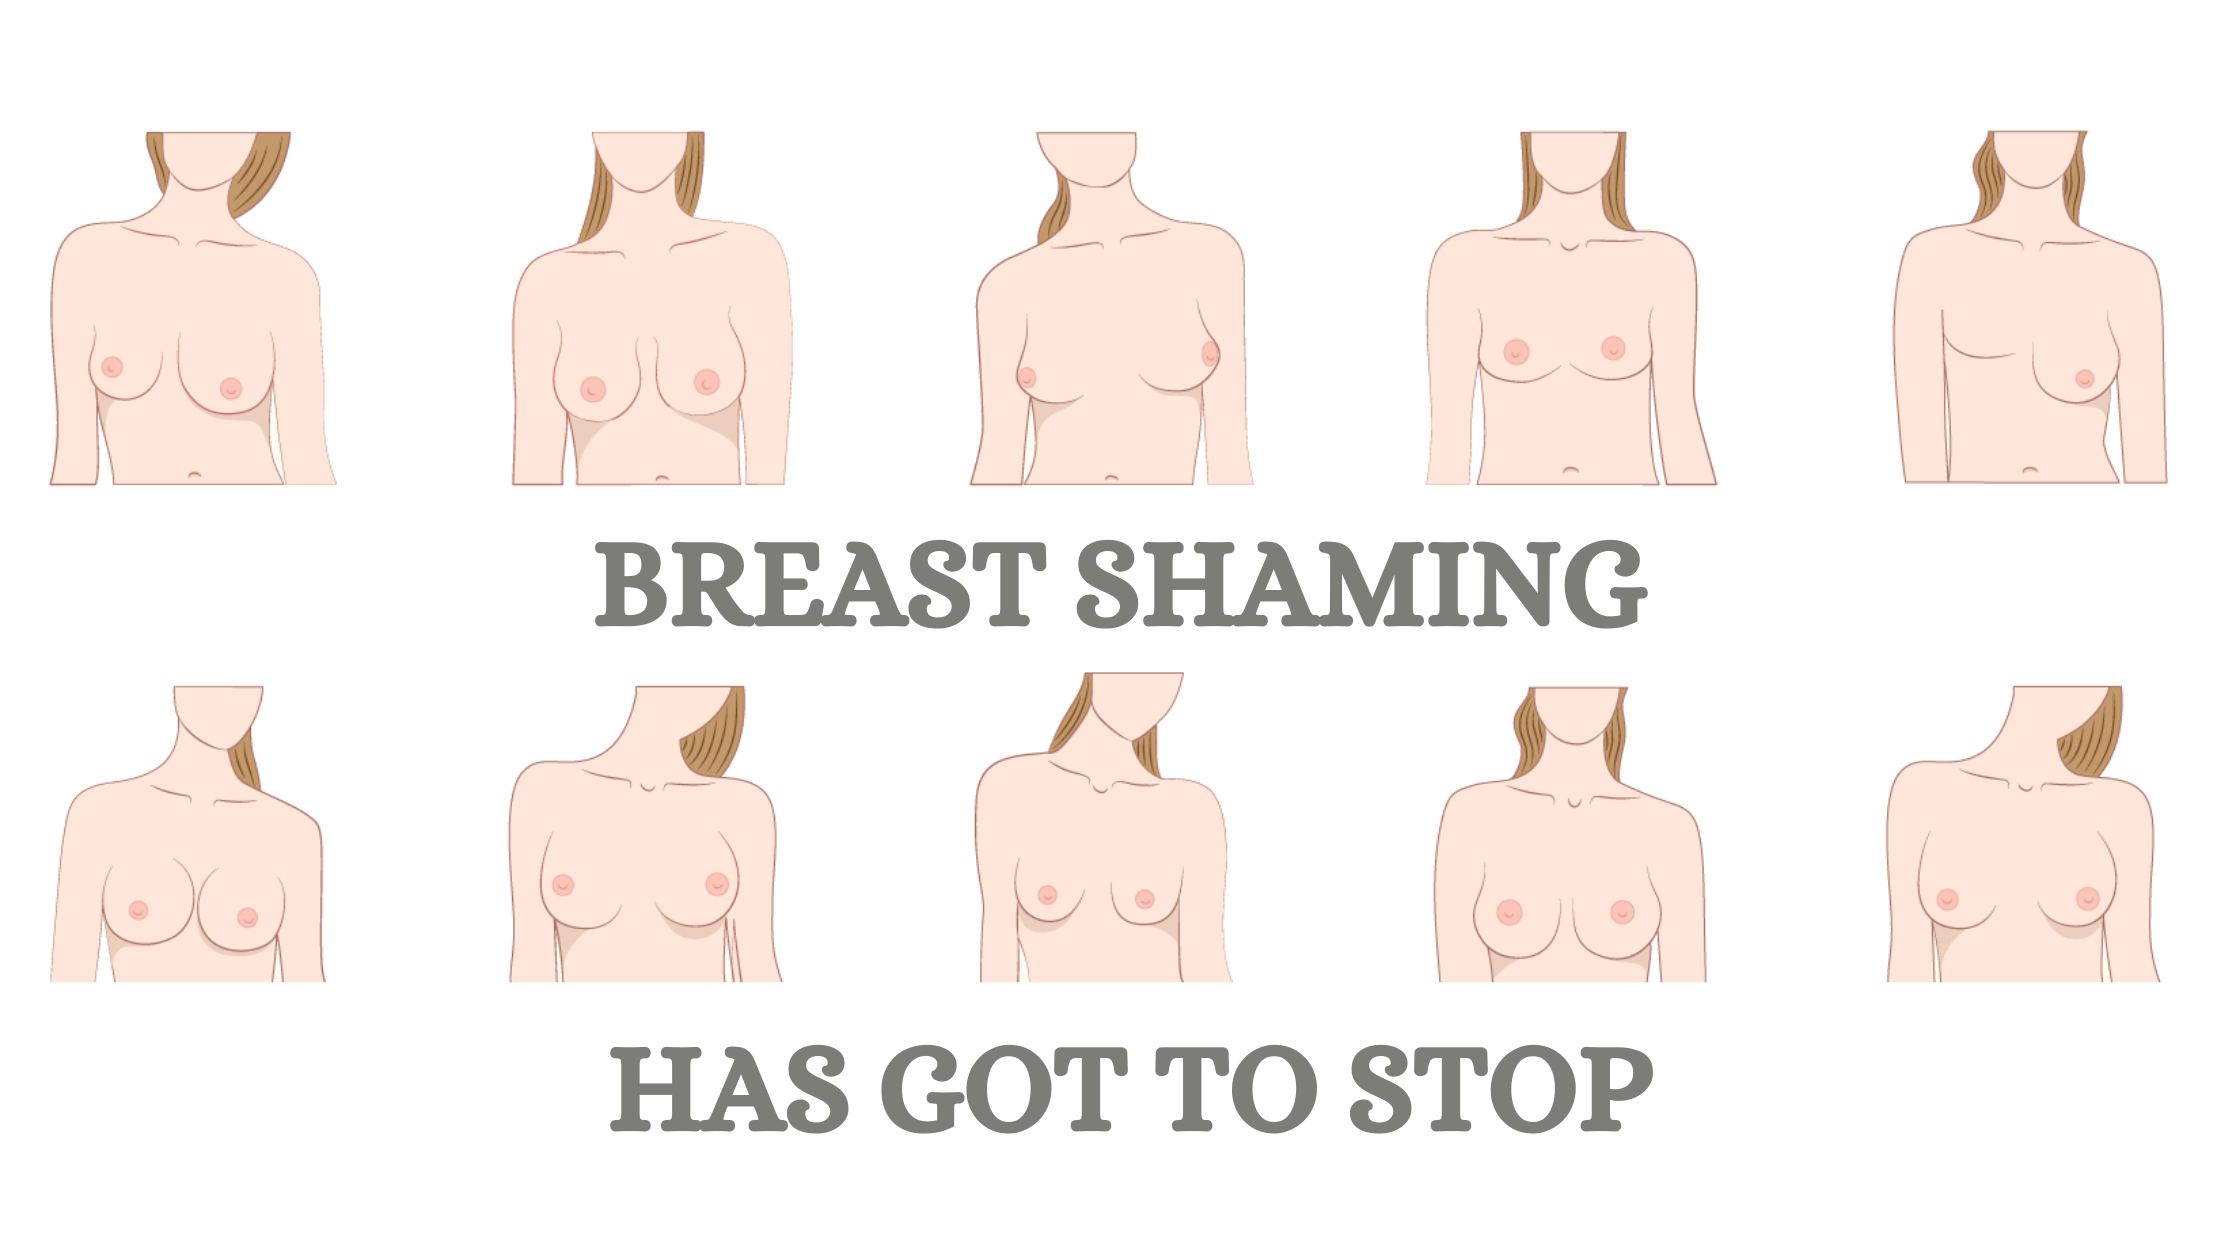 Why ARE women's breasts getting bigger? The answers may disturb you